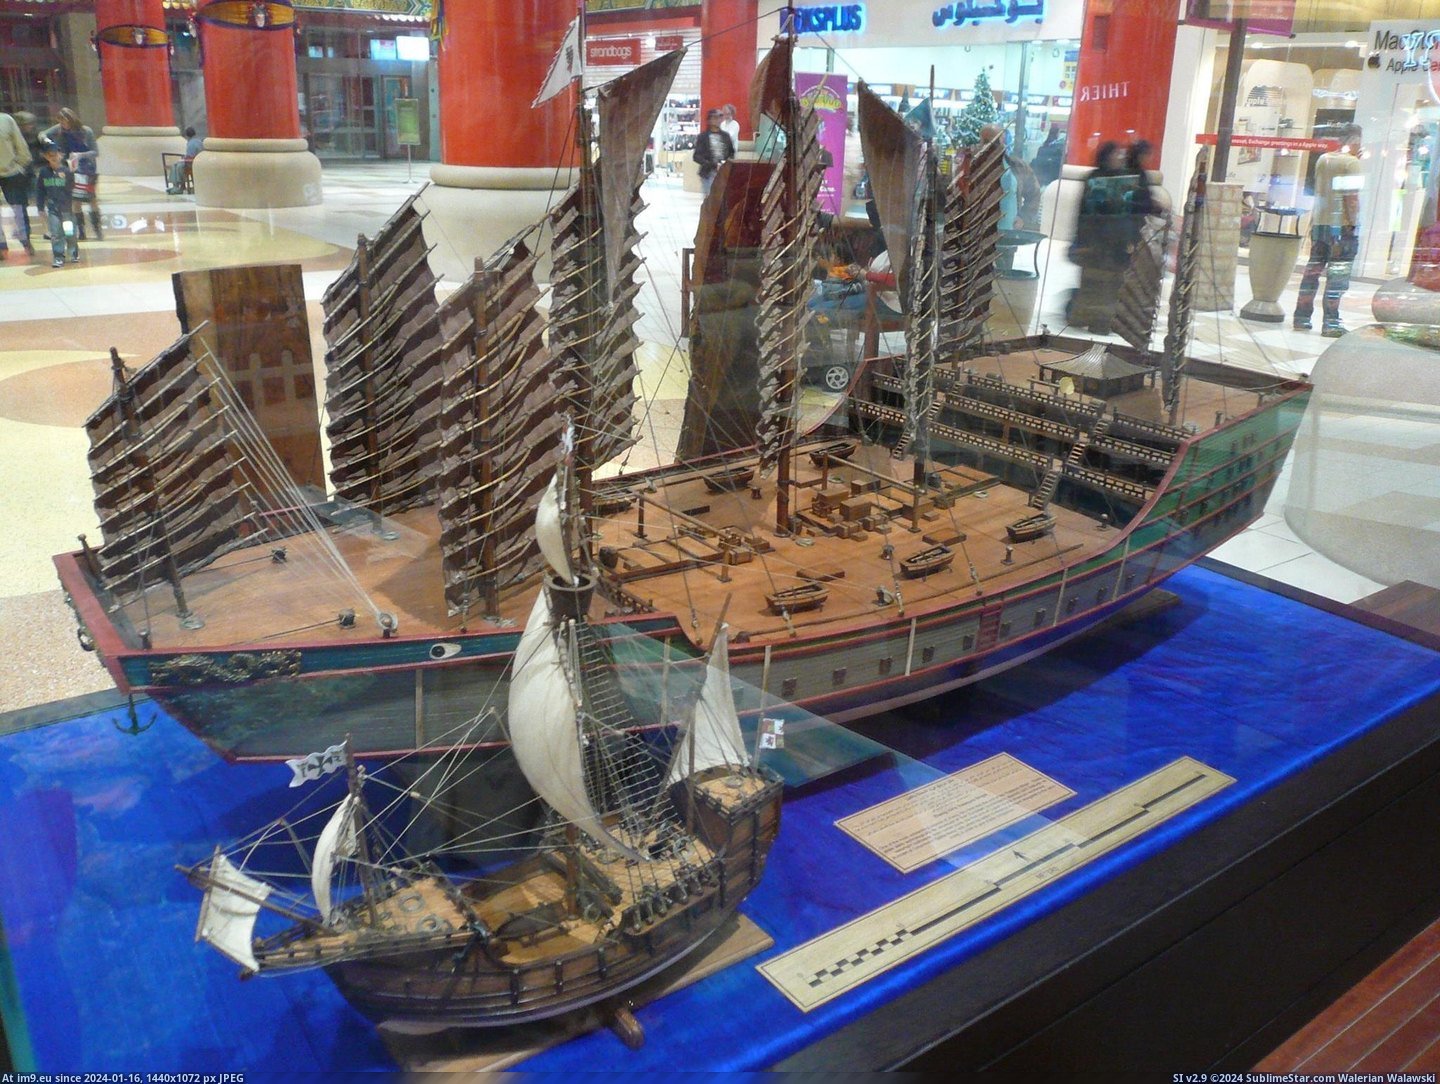 #Time #Santa #Chinese #Lived #Explorer #Christopher #Maria #Ship #Compared [Pics] Chinese explorer Zheng He's ship compared to Christopher Columbus' Santa Maria. Both lived and sailed at the same time. Pic. (Bild von album My r/PICS favs))